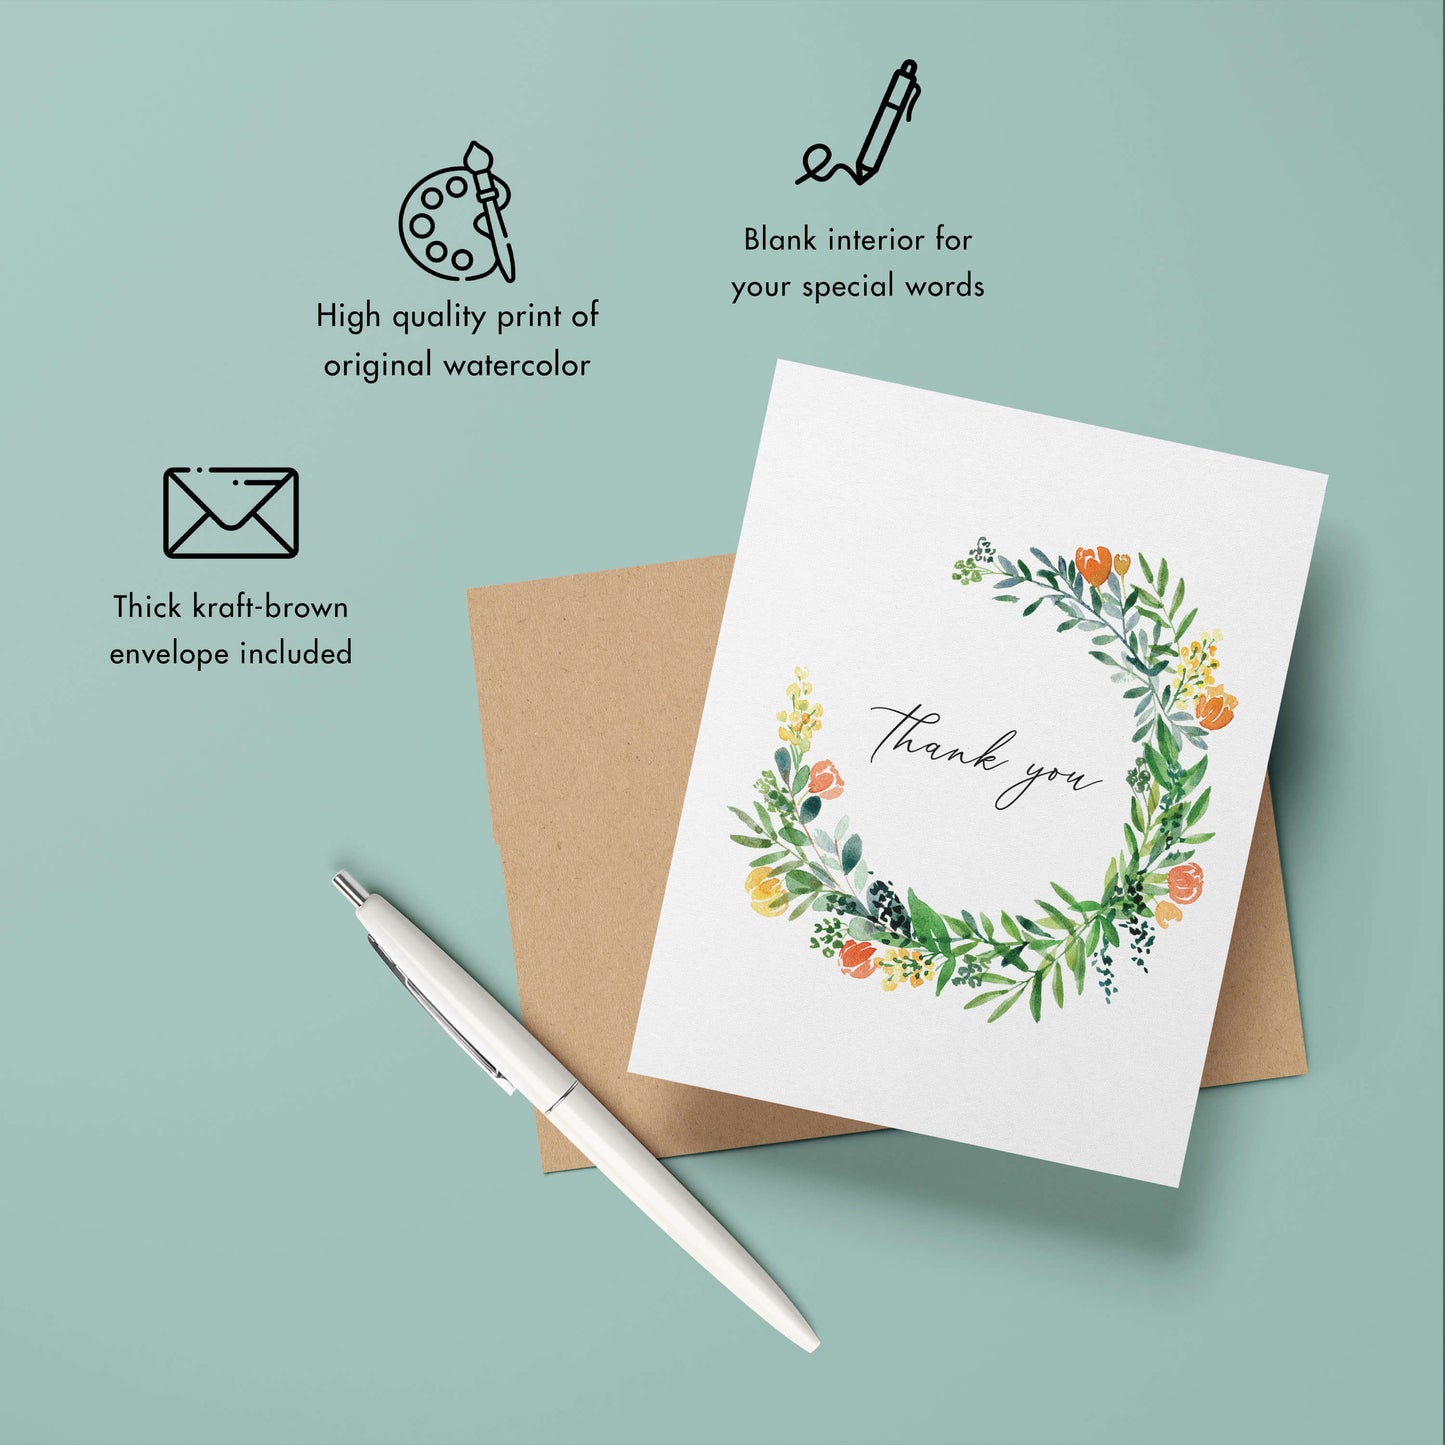 a thank card with a floral wreath on it